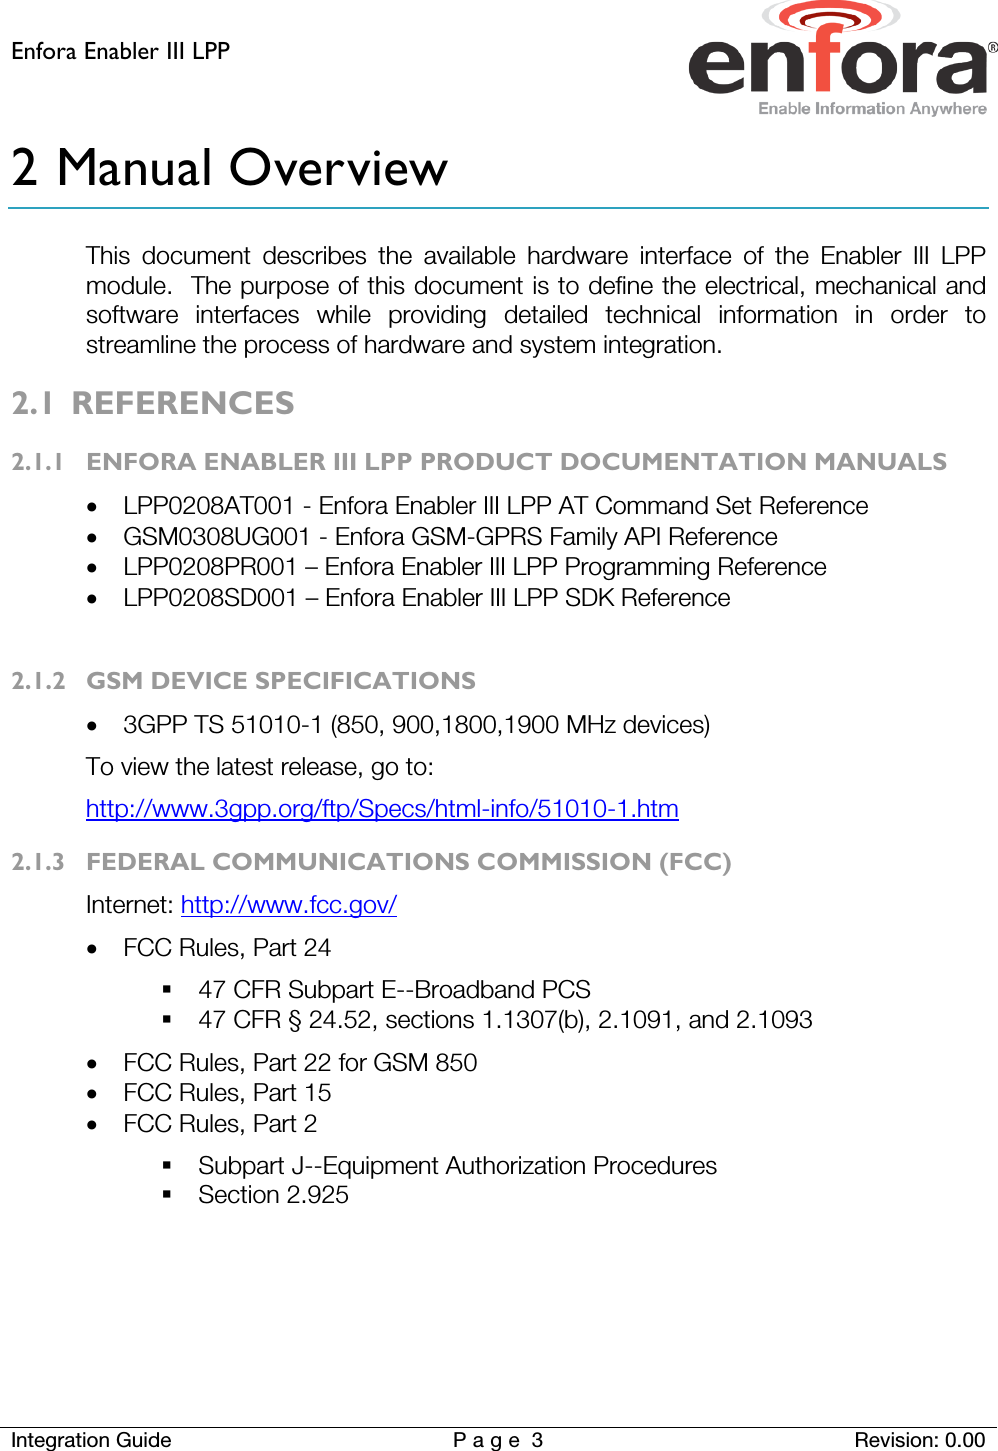 Enfora Enabler III LPP    Integration Guide Page 3  Revision: 0.00  2 Manual Overview This document describes the available hardware interface of the Enabler III LPP module.  The purpose of this document is to define the electrical, mechanical and software interfaces while providing detailed technical information in order to streamline the process of hardware and system integration. 2.1 REFERENCES 2.1.1 ENFORA ENABLER III LPP PRODUCT DOCUMENTATION MANUALS • LPP0208AT001 - Enfora Enabler III LPP AT Command Set Reference • GSM0308UG001 - Enfora GSM-GPRS Family API Reference • LPP0208PR001 – Enfora Enabler III LPP Programming Reference • LPP0208SD001 – Enfora Enabler III LPP SDK Reference  2.1.2 GSM DEVICE SPECIFICATIONS • 3GPP TS 51010-1 (850, 900,1800,1900 MHz devices)   To view the latest release, go to: http://www.3gpp.org/ftp/Specs/html-info/51010-1.htm 2.1.3 FEDERAL COMMUNICATIONS COMMISSION (FCC) Internet: http://www.fcc.gov/ • FCC Rules, Part 24   47 CFR Subpart E--Broadband PCS  47 CFR § 24.52, sections 1.1307(b), 2.1091, and 2.1093 • FCC Rules, Part 22 for GSM 850 • FCC Rules, Part 15 • FCC Rules, Part 2  Subpart J--Equipment Authorization Procedures  Section 2.925   